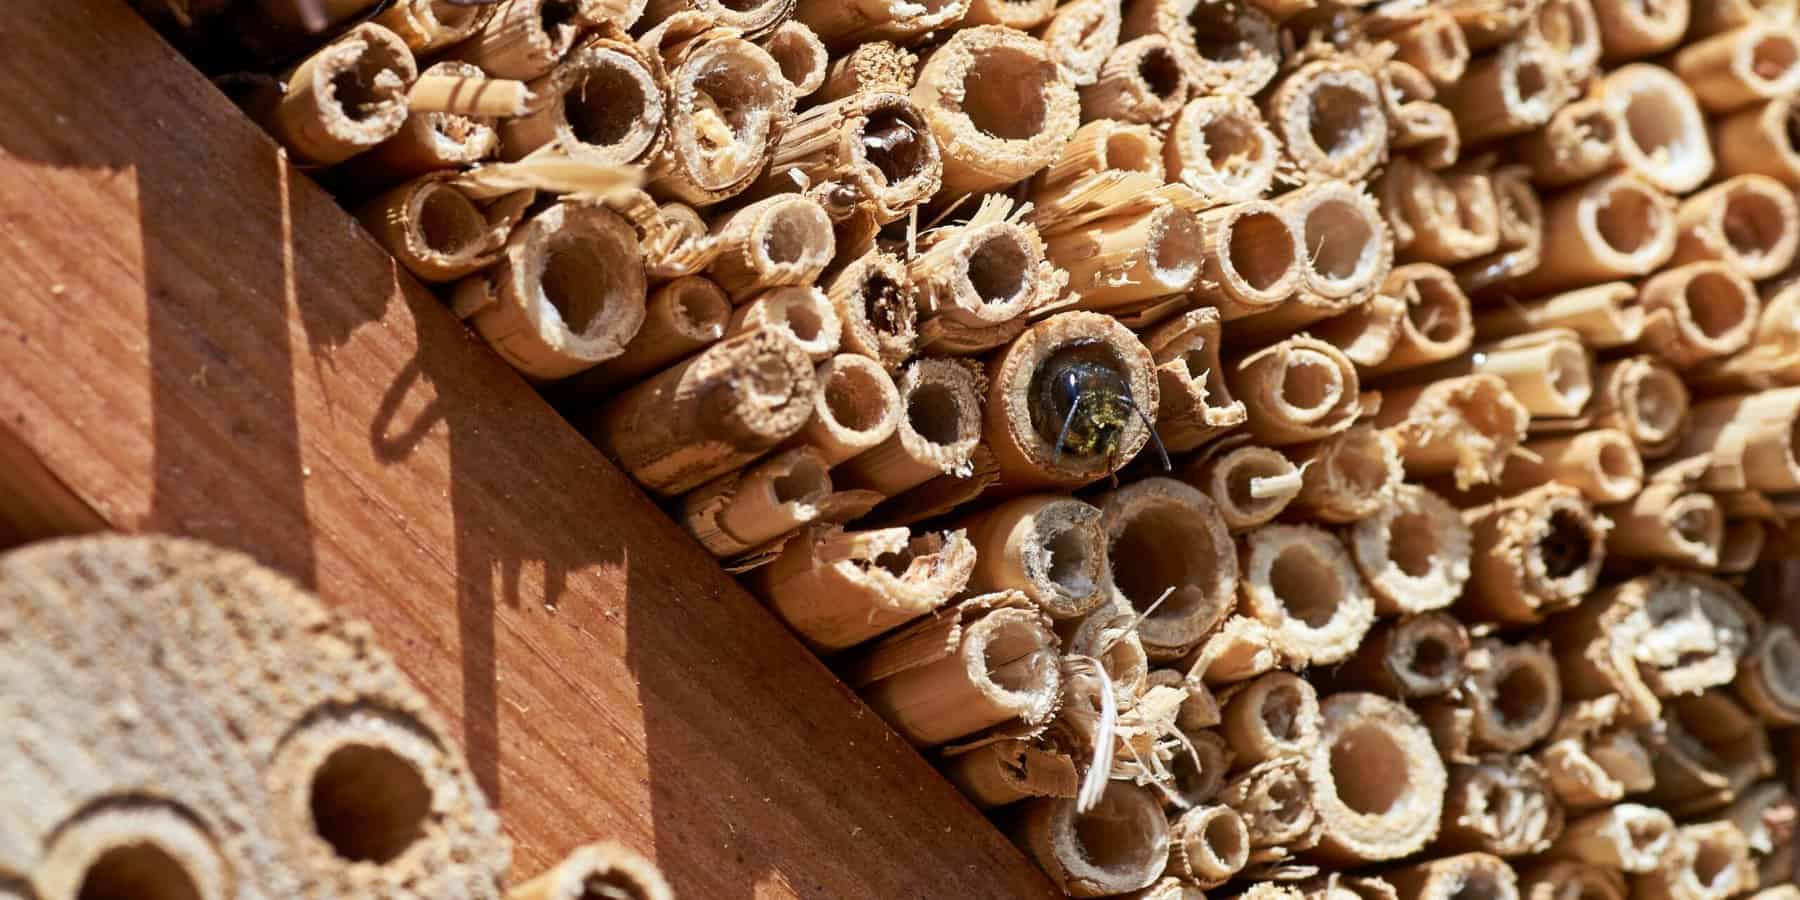 Featured image for “Enhance Garden Productivity with Mason Bees”